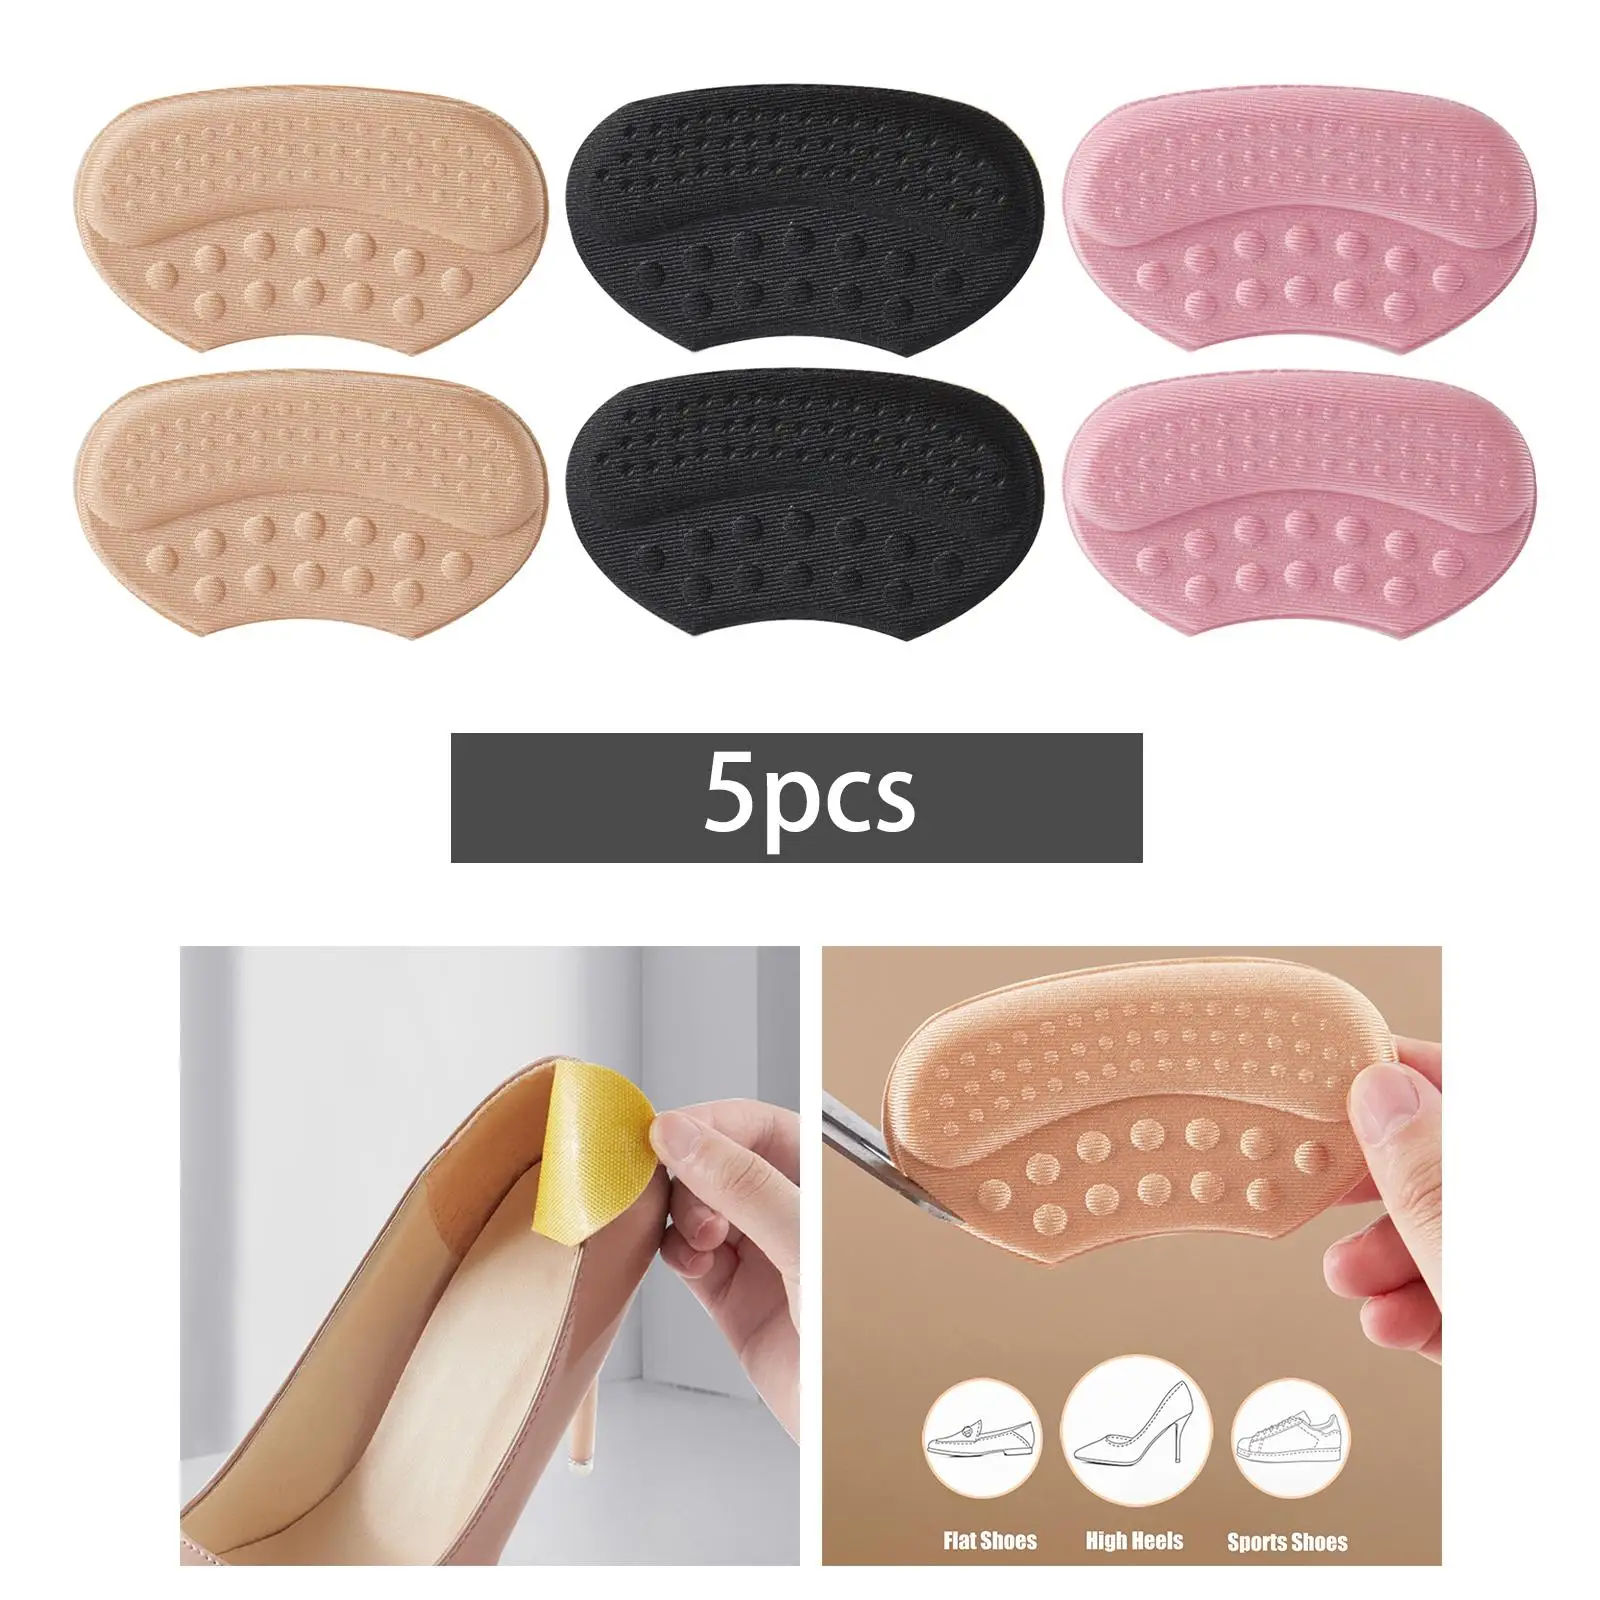  Cushion Pads Comfortable Durable Wear Resistant Heel Protector